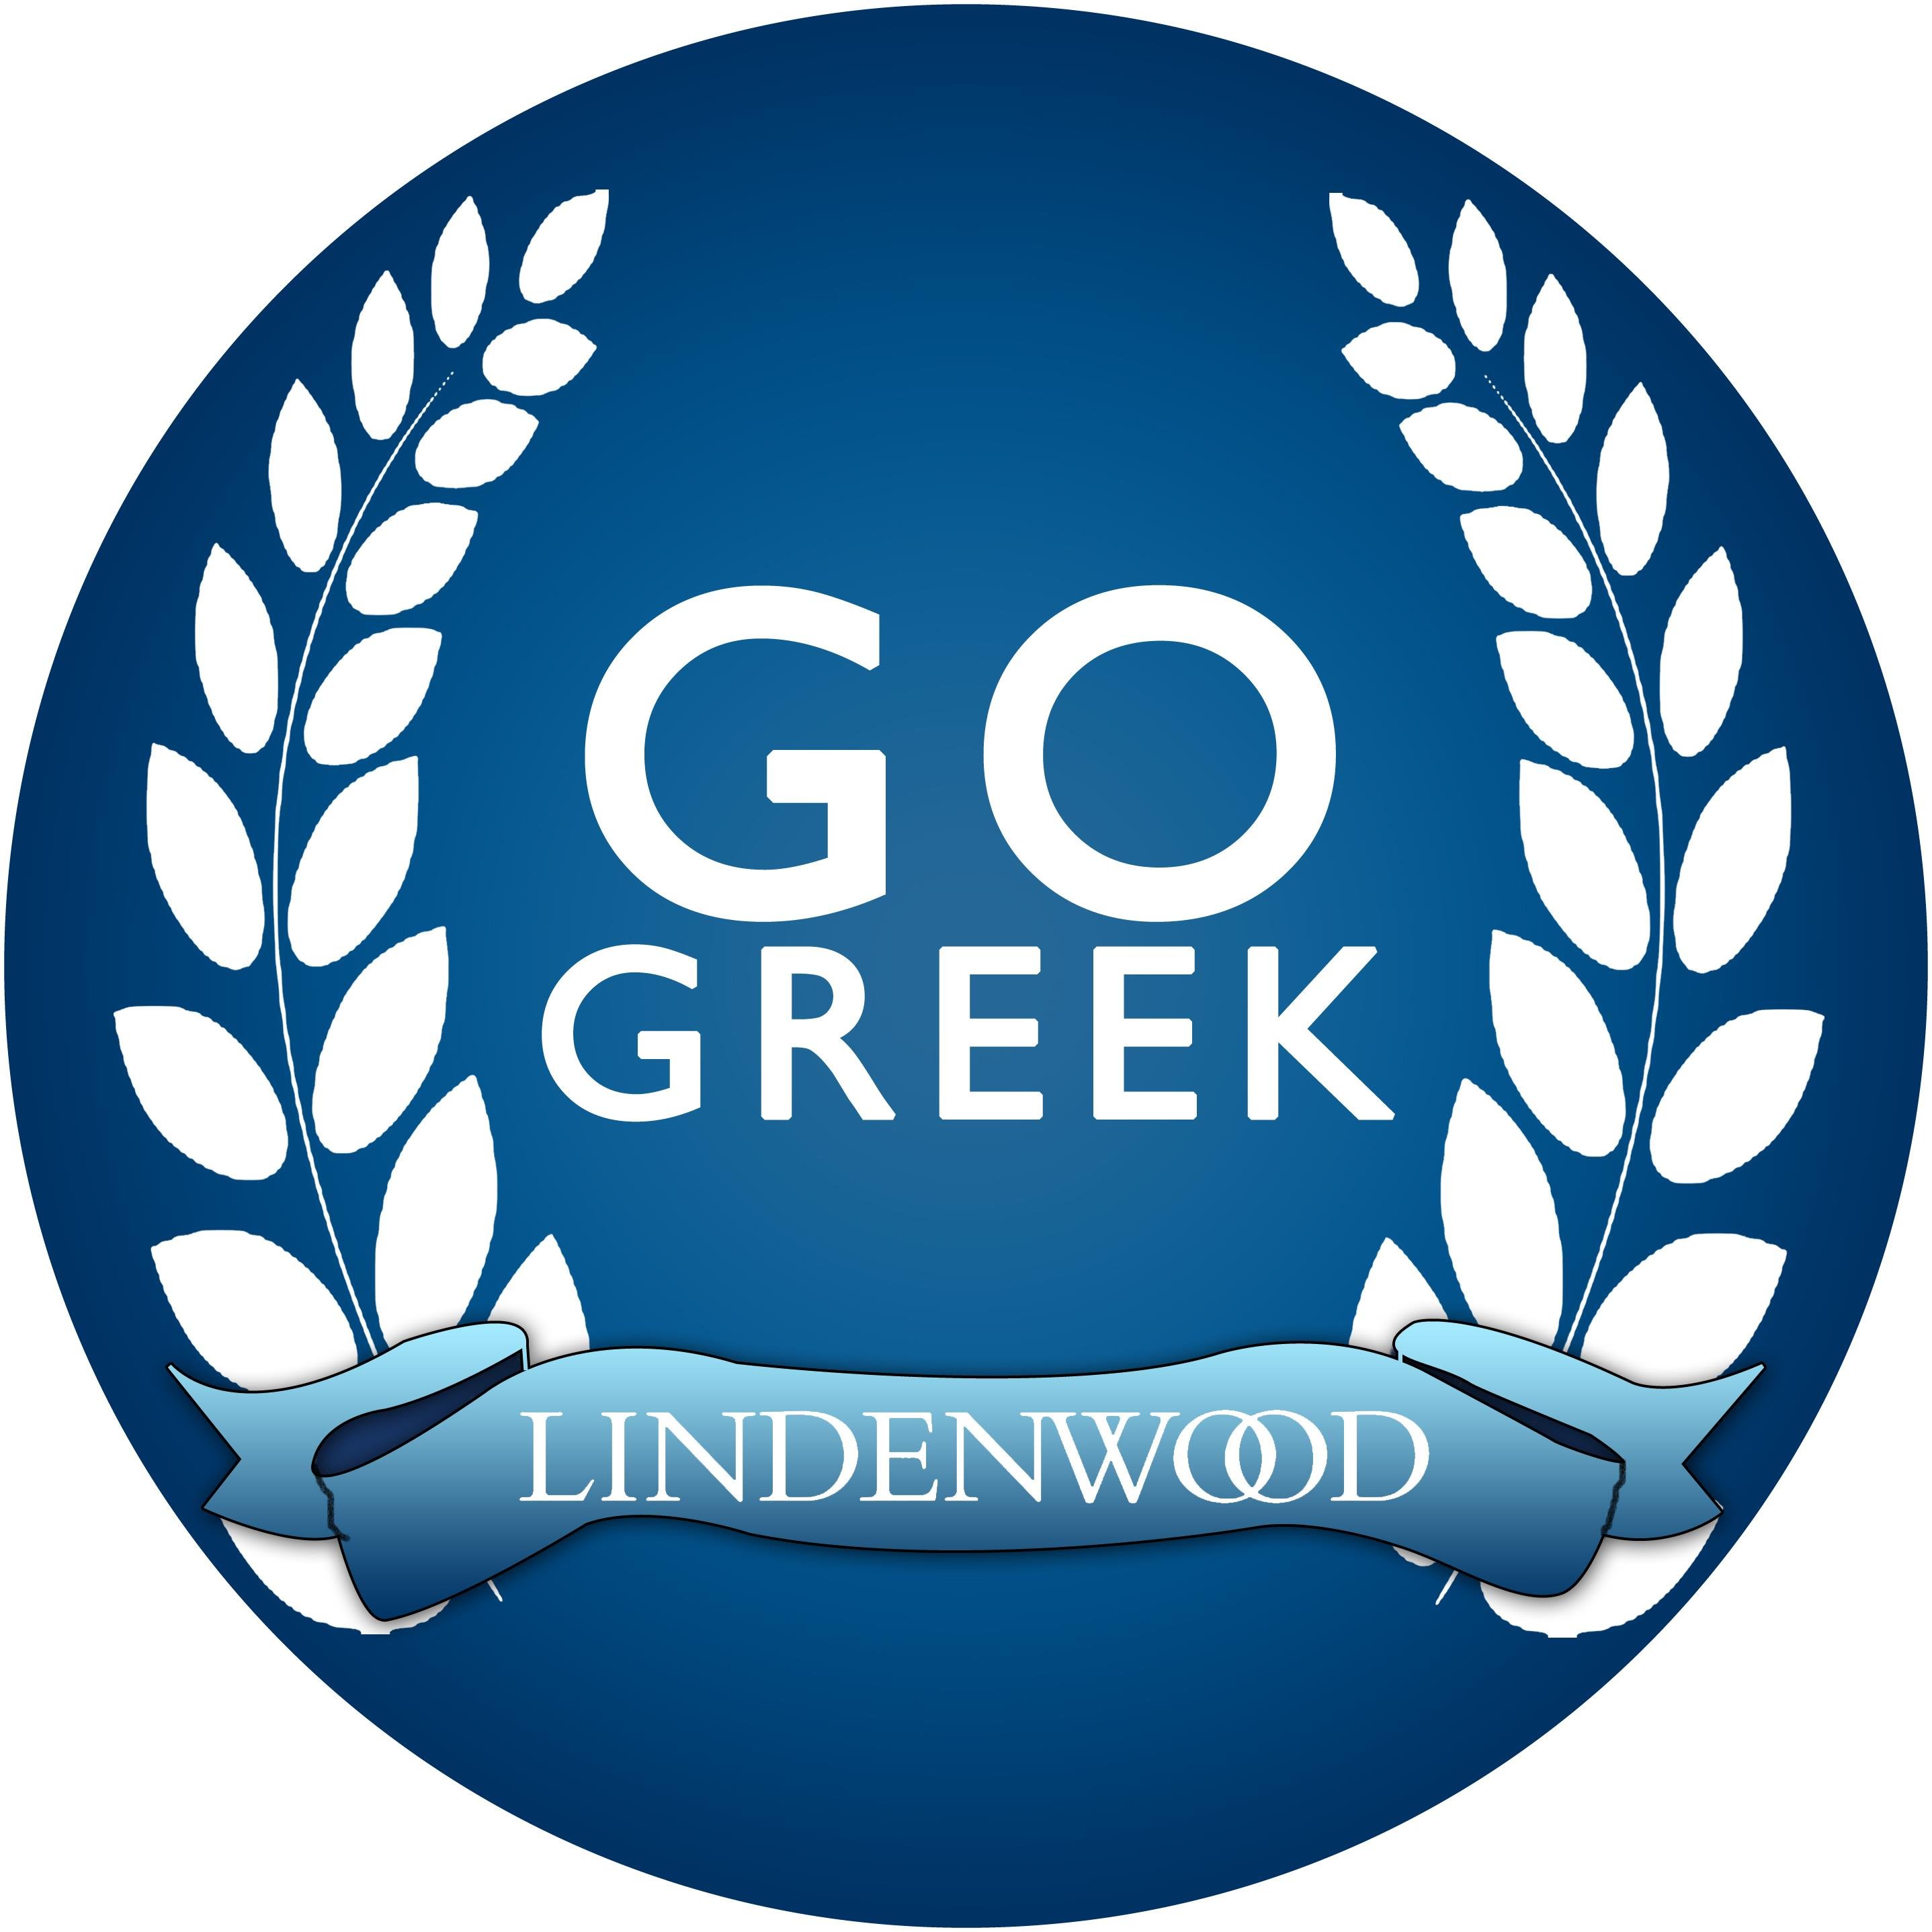 The Official Twitter of the Lindenwood Greek Council.